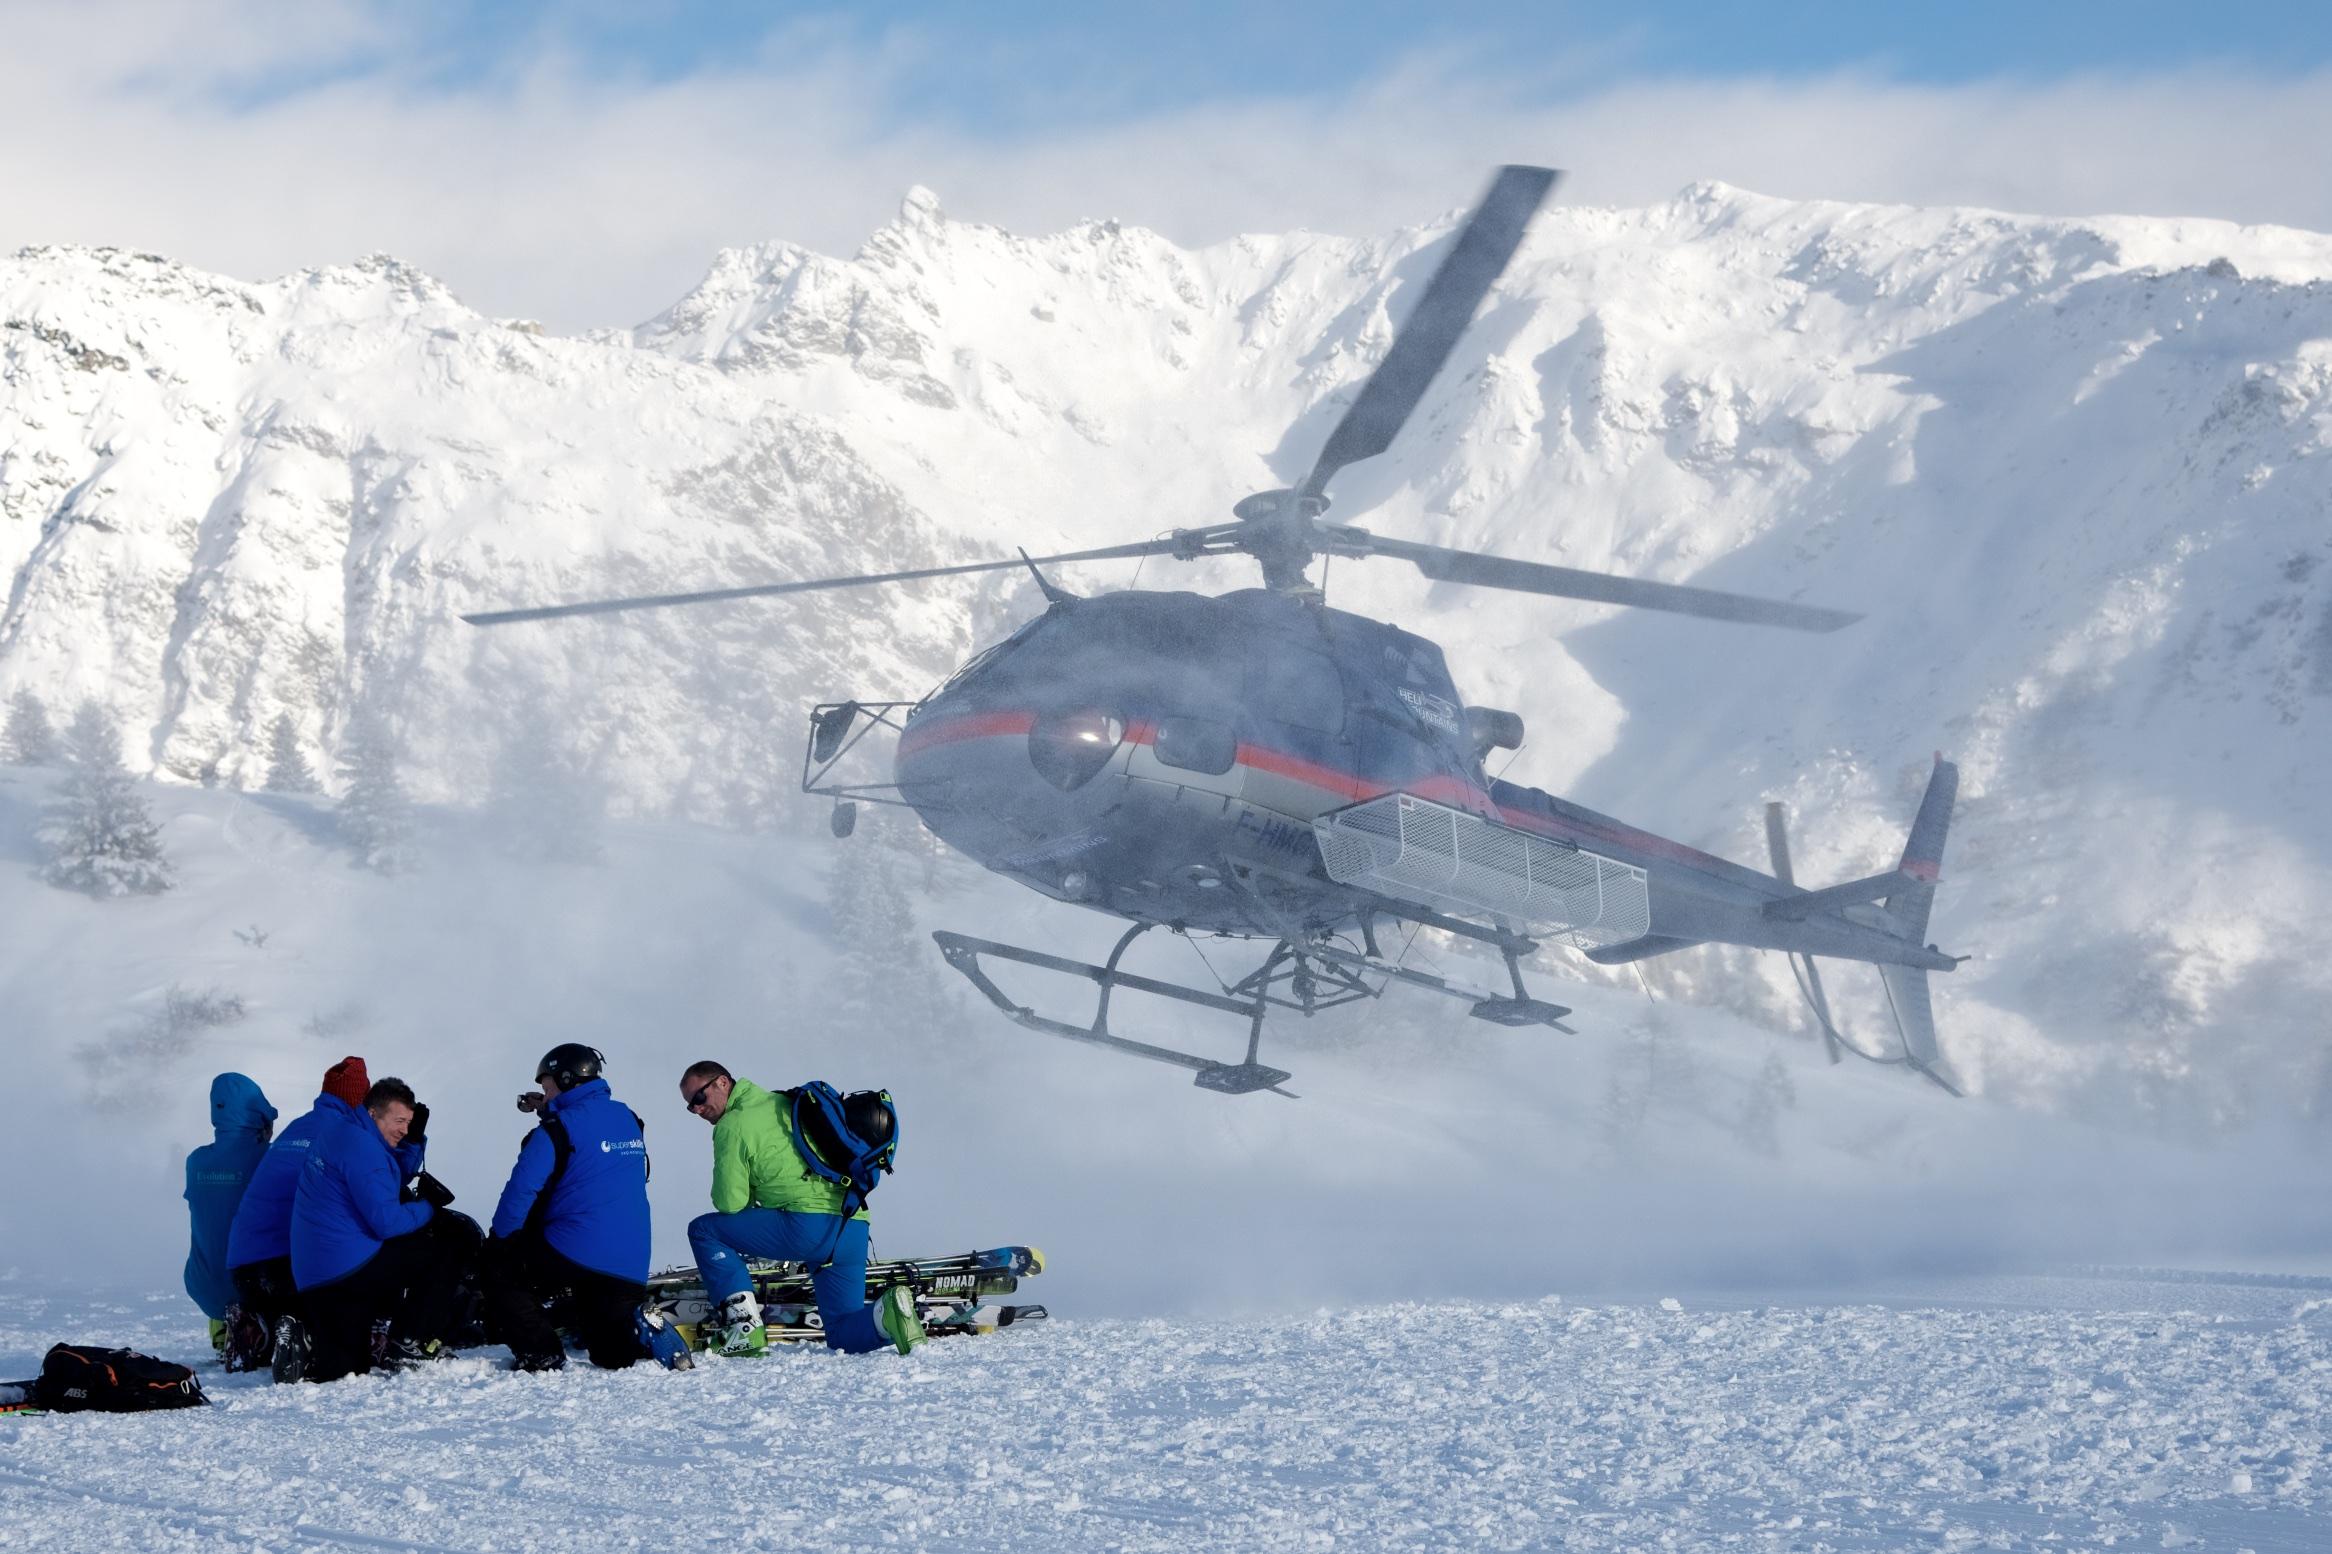 &#13;
A helicopter takes the group off-piste for some Bond-style action&#13;